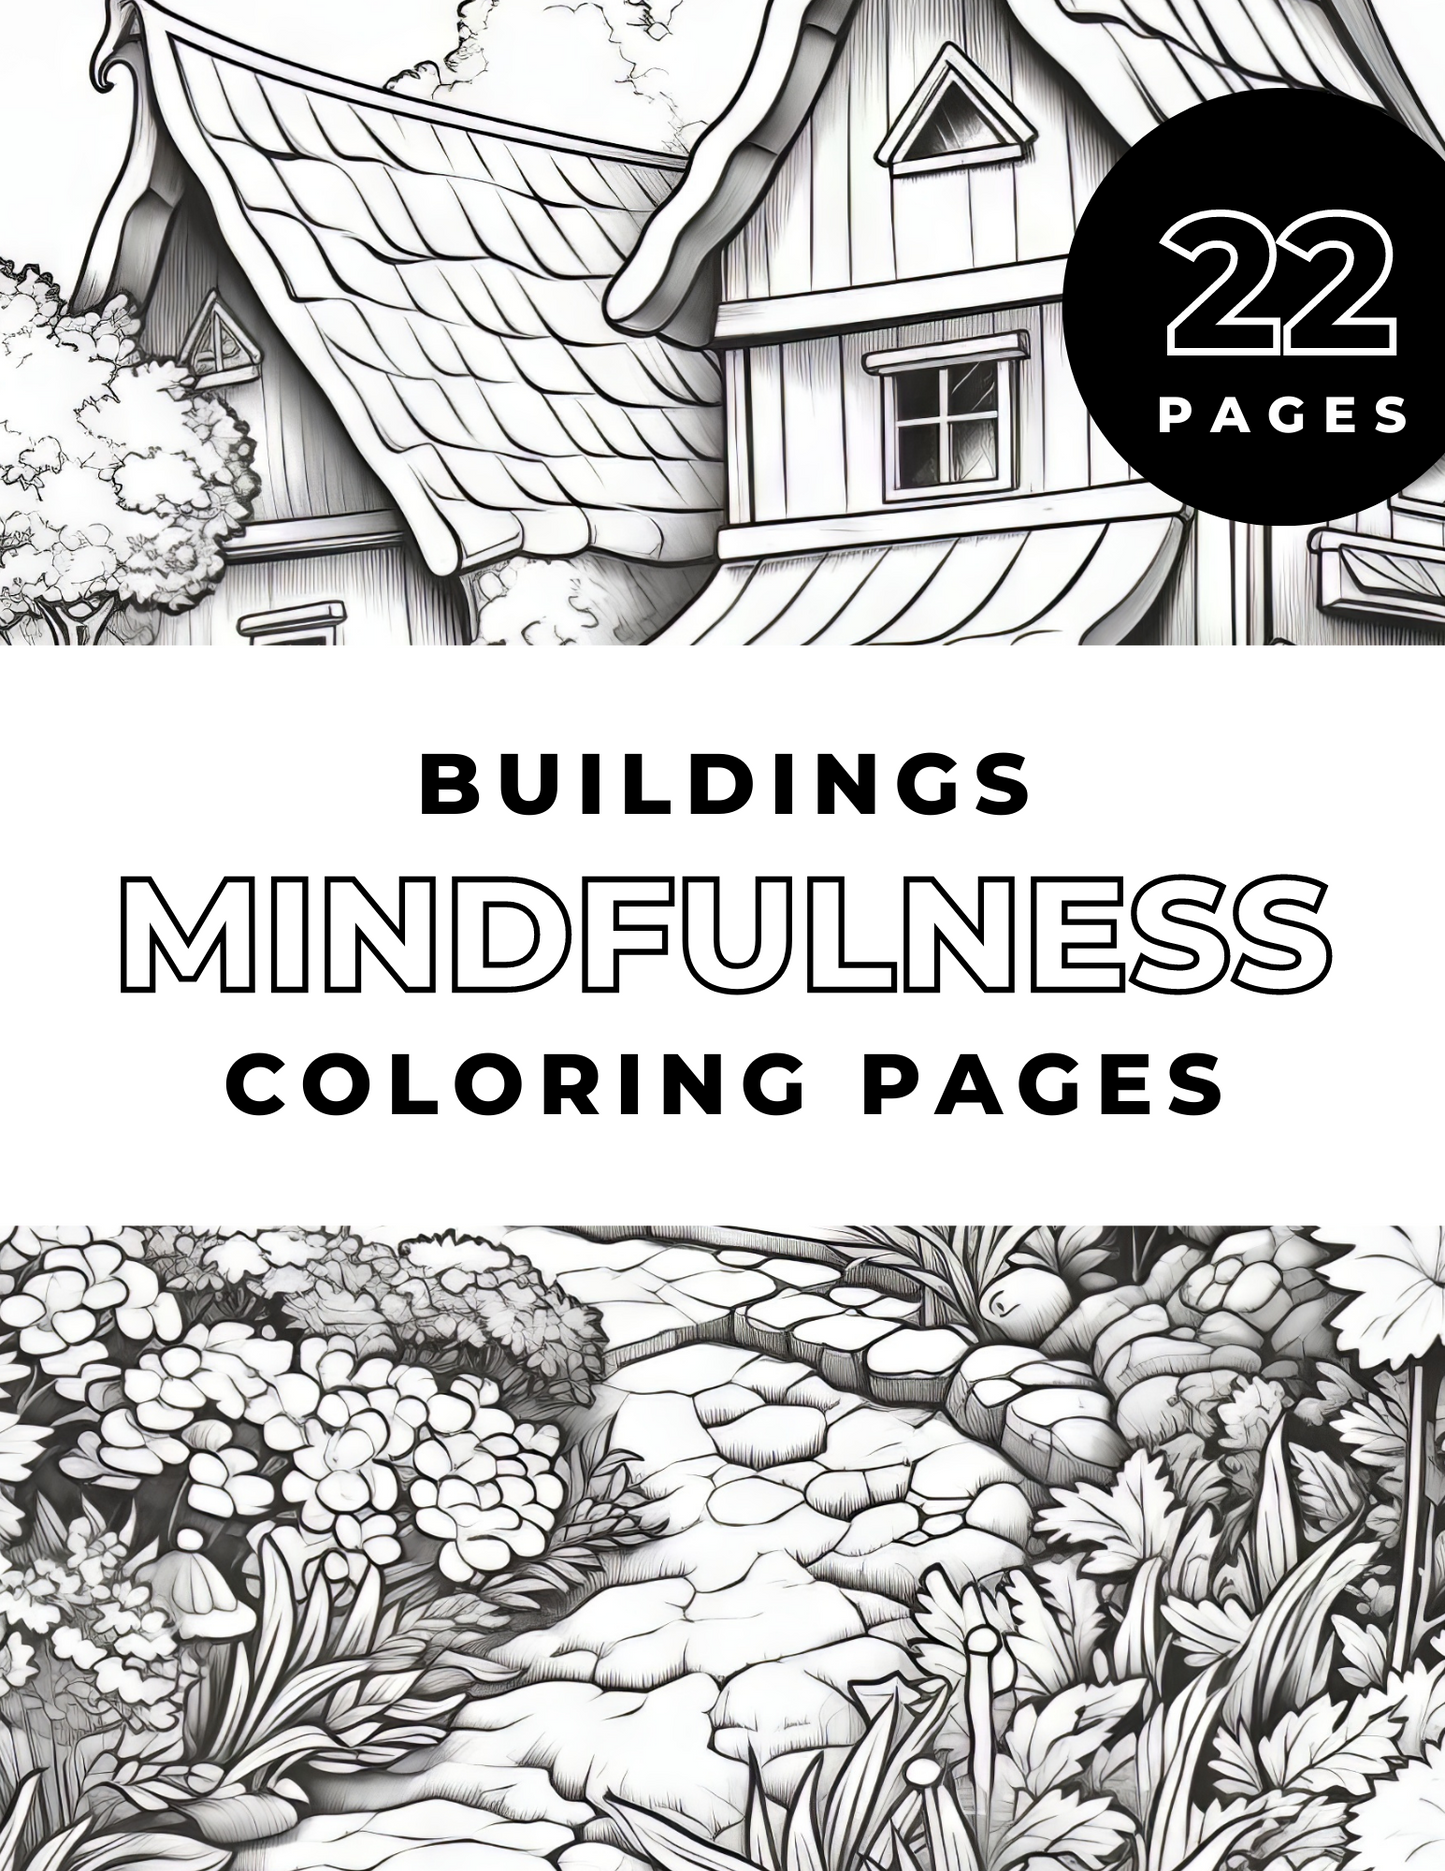 The Buildings Mindfulness Coloring Book